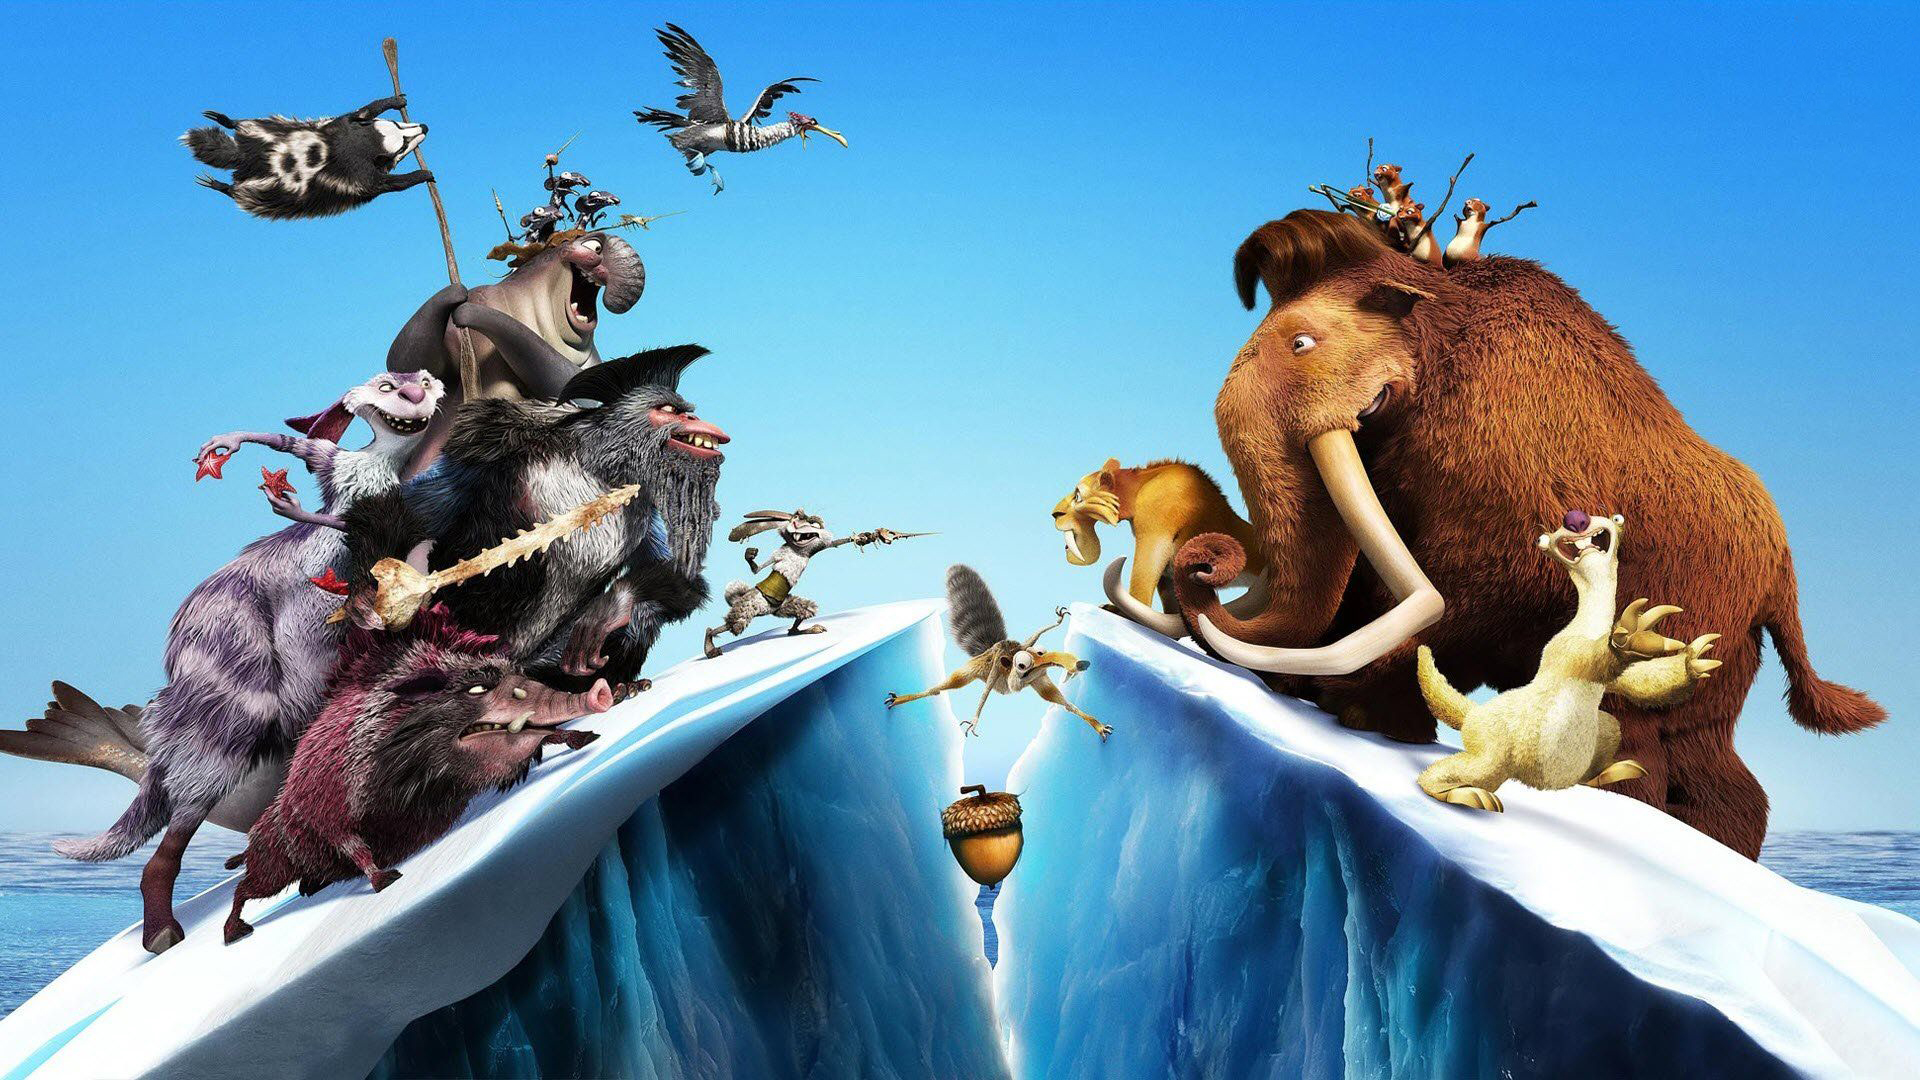 Ice Age: Continental Drift: Arctic Games